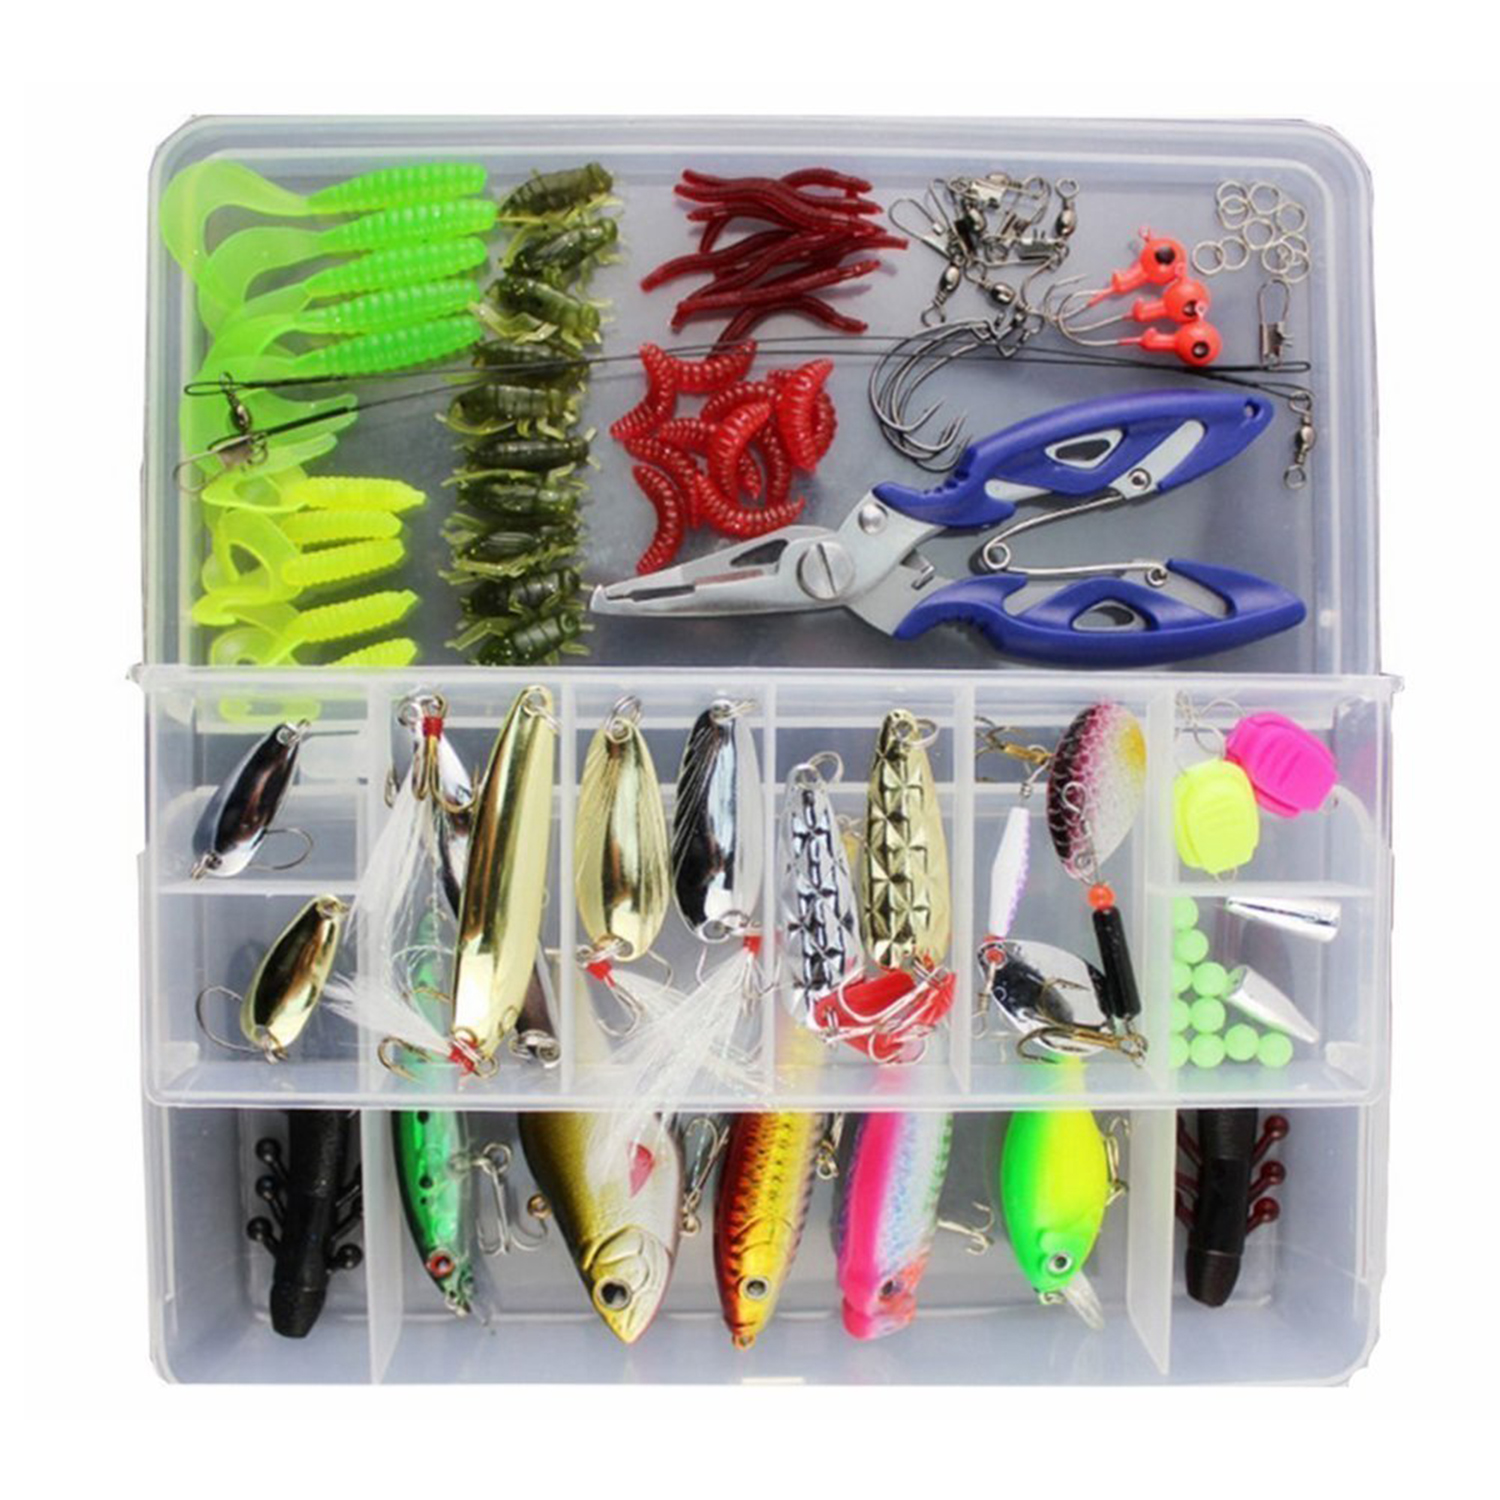 Fishing Lures Assorted Starter Set with Tackle Box, Include Frog Minnow Popper Pencil Crank Spoon Spinner Maggot Shrimp Baits Swivels for Freshwater Trout Bass Salmon
Fishing Lures Assorted Starter Set with Tackle Box, Include Frog Minnow Popper Pencil Crank Spoon Spinner Maggot Shrimp Baits Swivels for Freshwater Trout Bass Salmon
Fishing Lures Assorted Starter Set with Tackle Box, Include Frog Minnow Popper Pencil Crank Spoon Spinner Maggot Shrimp Baits Swivels for Freshwater Trout Bass Salmon
Fishing Lures Assorted Starter Set with Tackle Box, Include Frog Minnow Popper Pencil Crank Spoon Spinner Maggot Shrimp Baits Swivels for Freshwater Trout Bass Salmon
Fishing Lures Assorted Starter Set with Tackle Box, Include Frog Minnow Popper Pencil Crank Spoon Spinner Maggot Shrimp Baits Swivels for Freshwater Trout Bass Salmon
Fishing Lures Assorted Starter Set with Tackle Box, Include Frog Minnow Popper Pencil Crank Spoon Spinner Maggot Shrimp Baits Swivels for Freshwater Trout Bass Salmon
Fishing Lures Assorted Starter Set with Tackle Box, Include Frog Minnow Popper Pencil Crank Spoon Spinner Maggot Shrimp Baits Swivels for Freshwater Trout Bass Salmon
	
Gatorade Classic Cooler, 1/2 Gallon, 1 Count
2
$11.98$11.98WAS $13.99$13.99
Shop Now
Fishing Lures Assorted Starter Set with Tackle Box, Include Frog Minnow Popper Pencil Crank Spoon Spinner Maggot Shrimp Baits Swivels for Freshwater Trout Bass Salmon